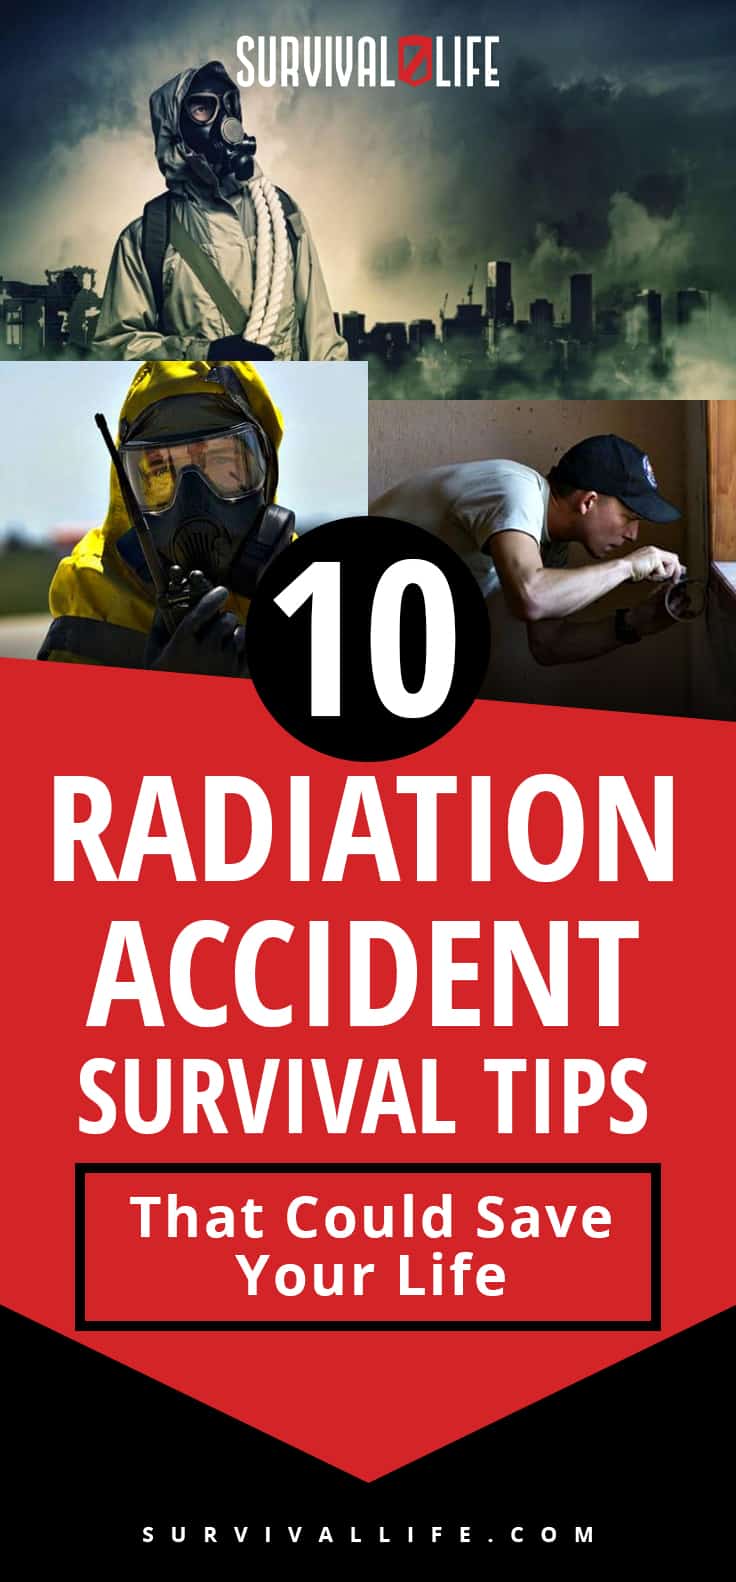 10 Radiation Accident Survival Tips That Could Save Your Life